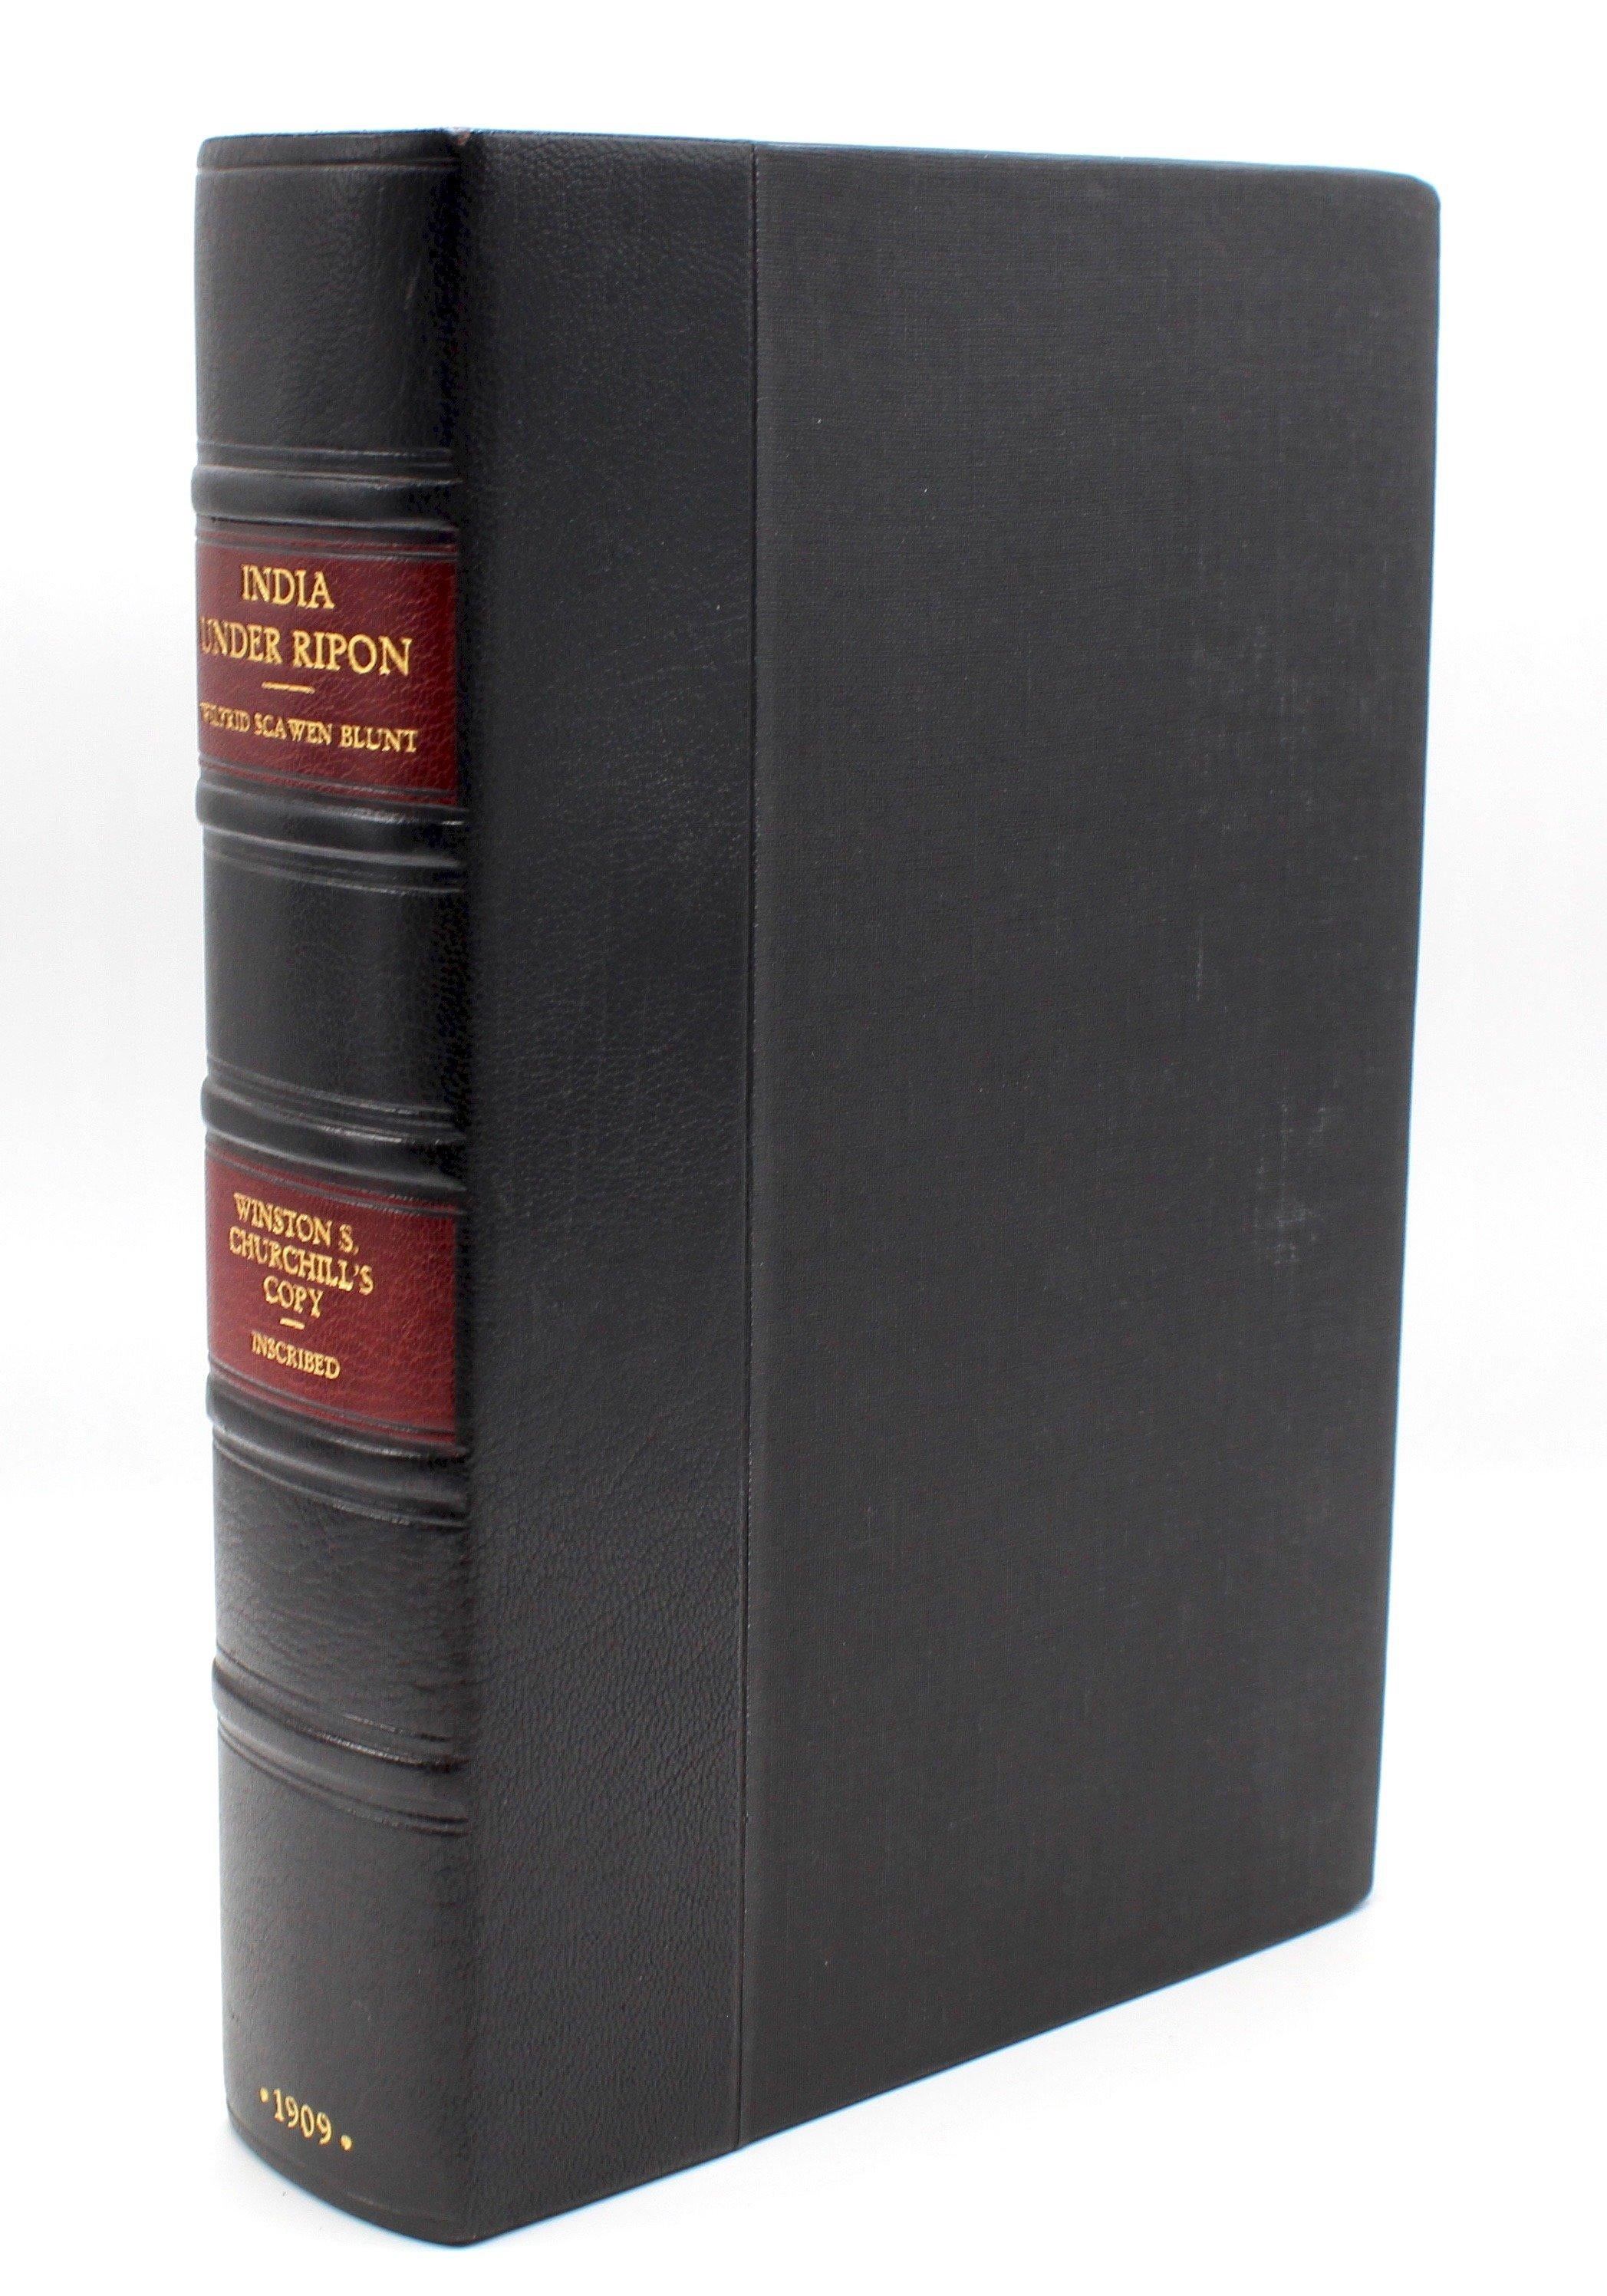 Blunt, Wilfrid Scawen Blunt. India Under Ripon: A Private Diary. London: T. Fisher Unwin, 1909. First edition, first printing, first copy printed. With dated inscription from author to Winston Churchill. Winston Churchill and Randolph S. Churchill’s